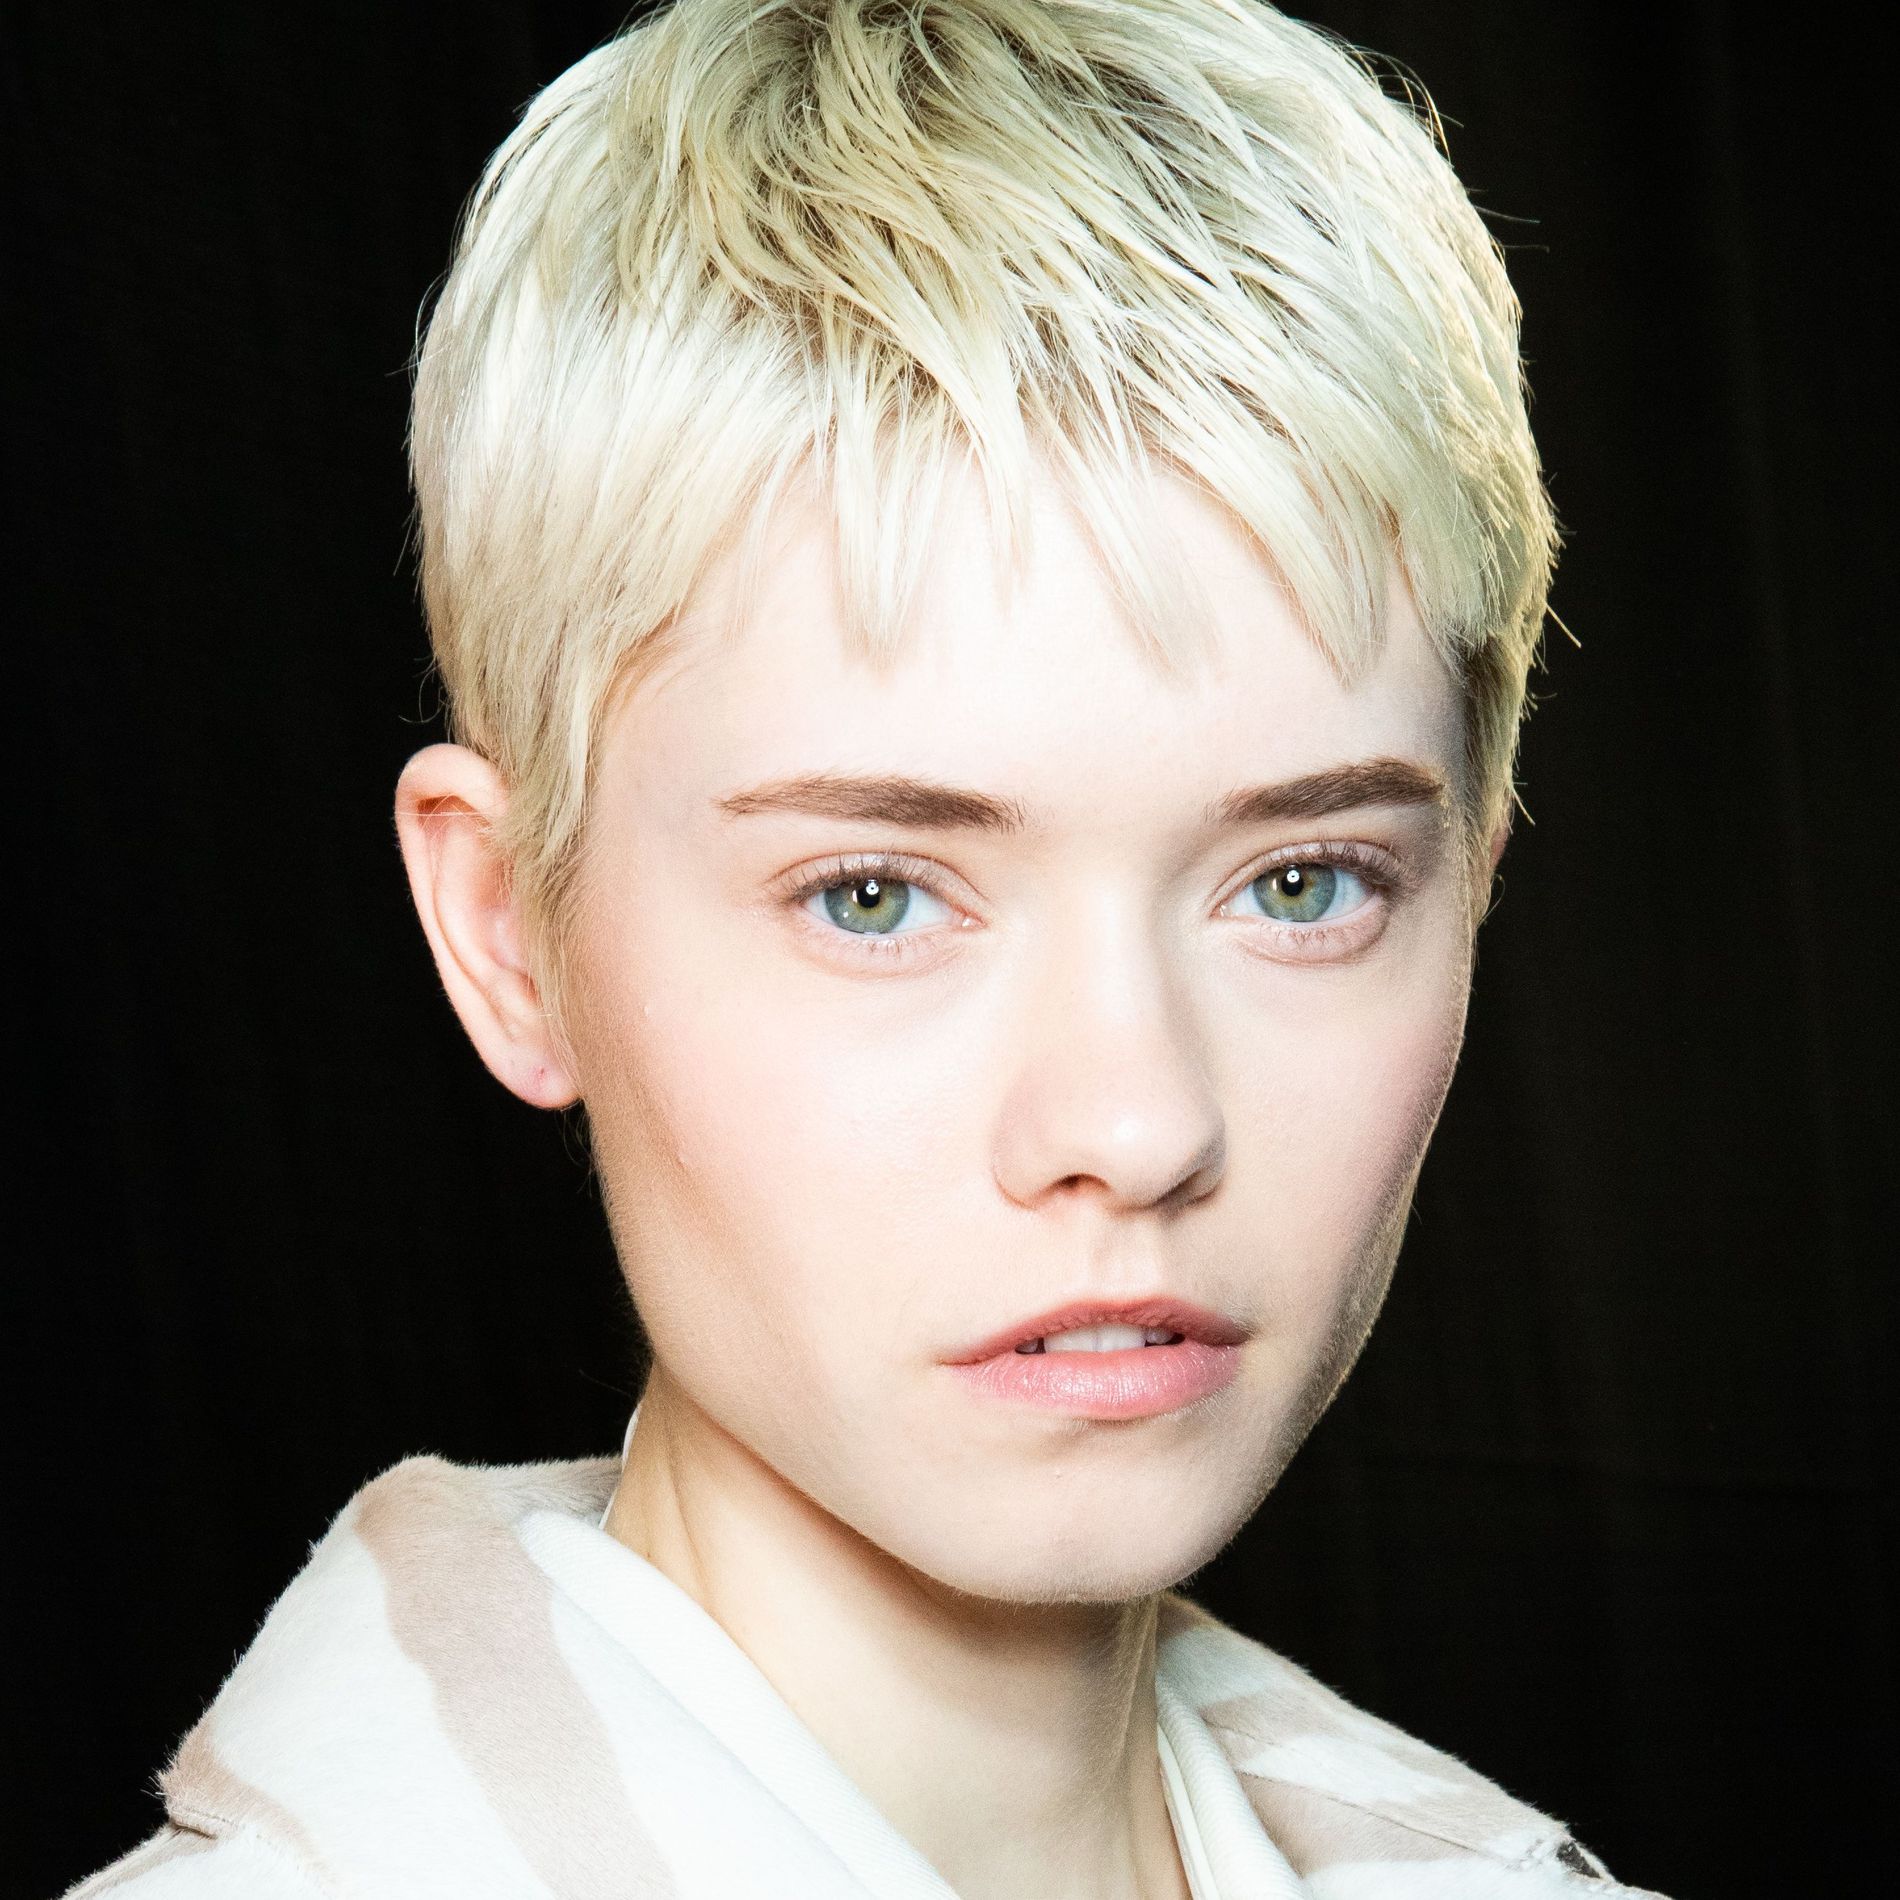 The 5 key hair trends this autumn, according to experts - Vogue Scandinavia